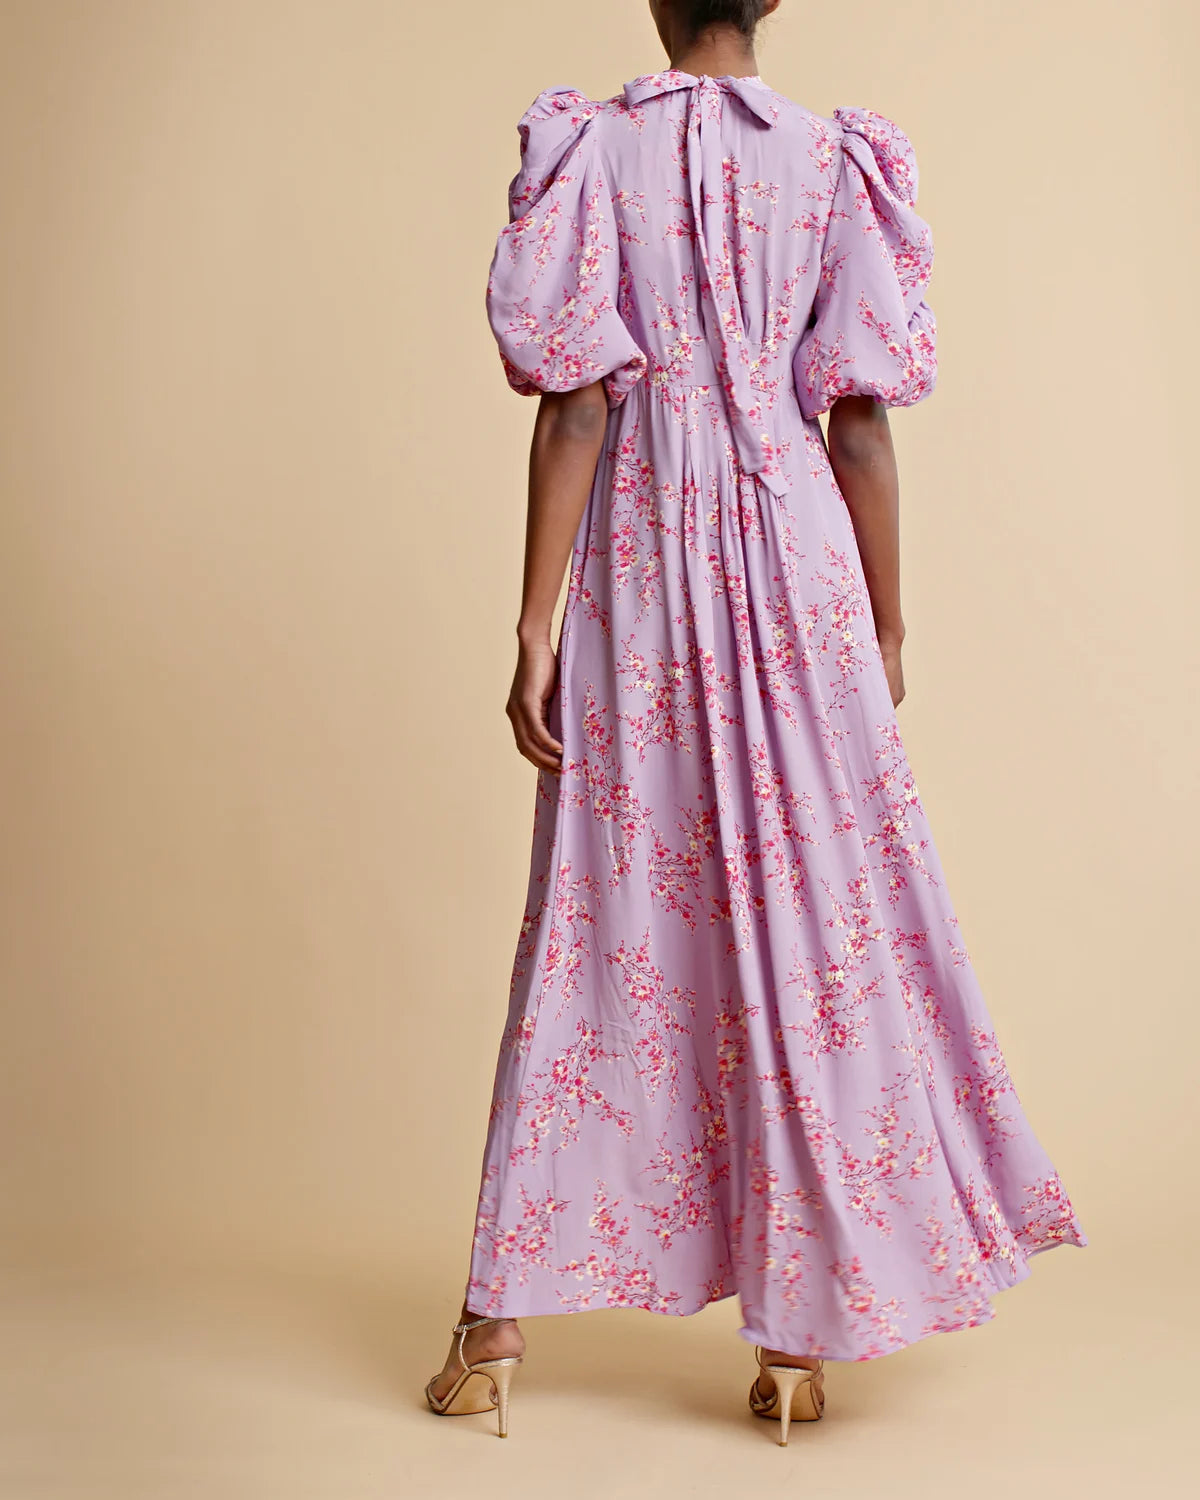 Spring Tieback Gown - Cherry Blossom